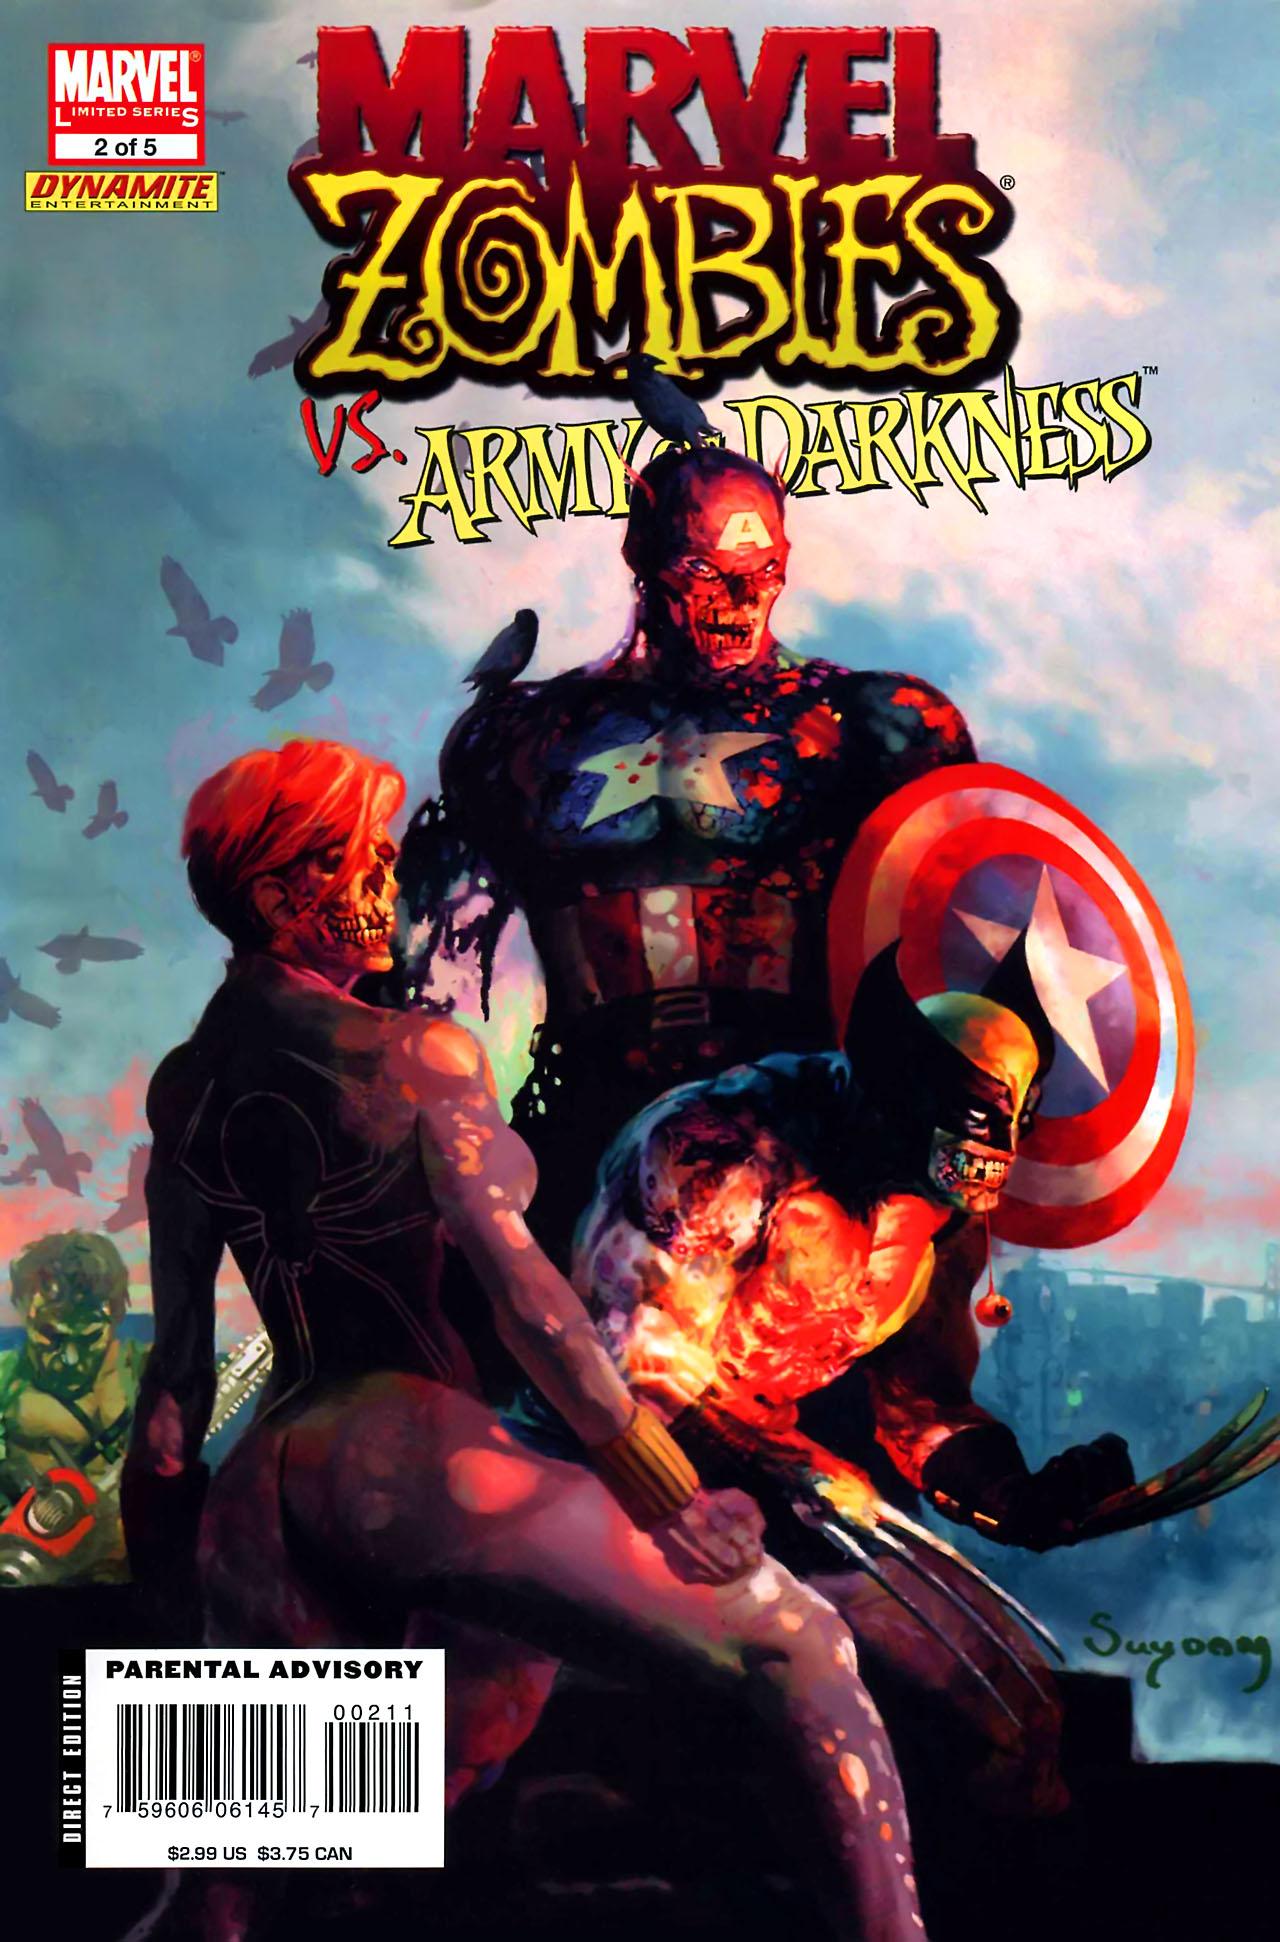 Marvel Zombies Vs. Army of Darkness Vol. 1 #2